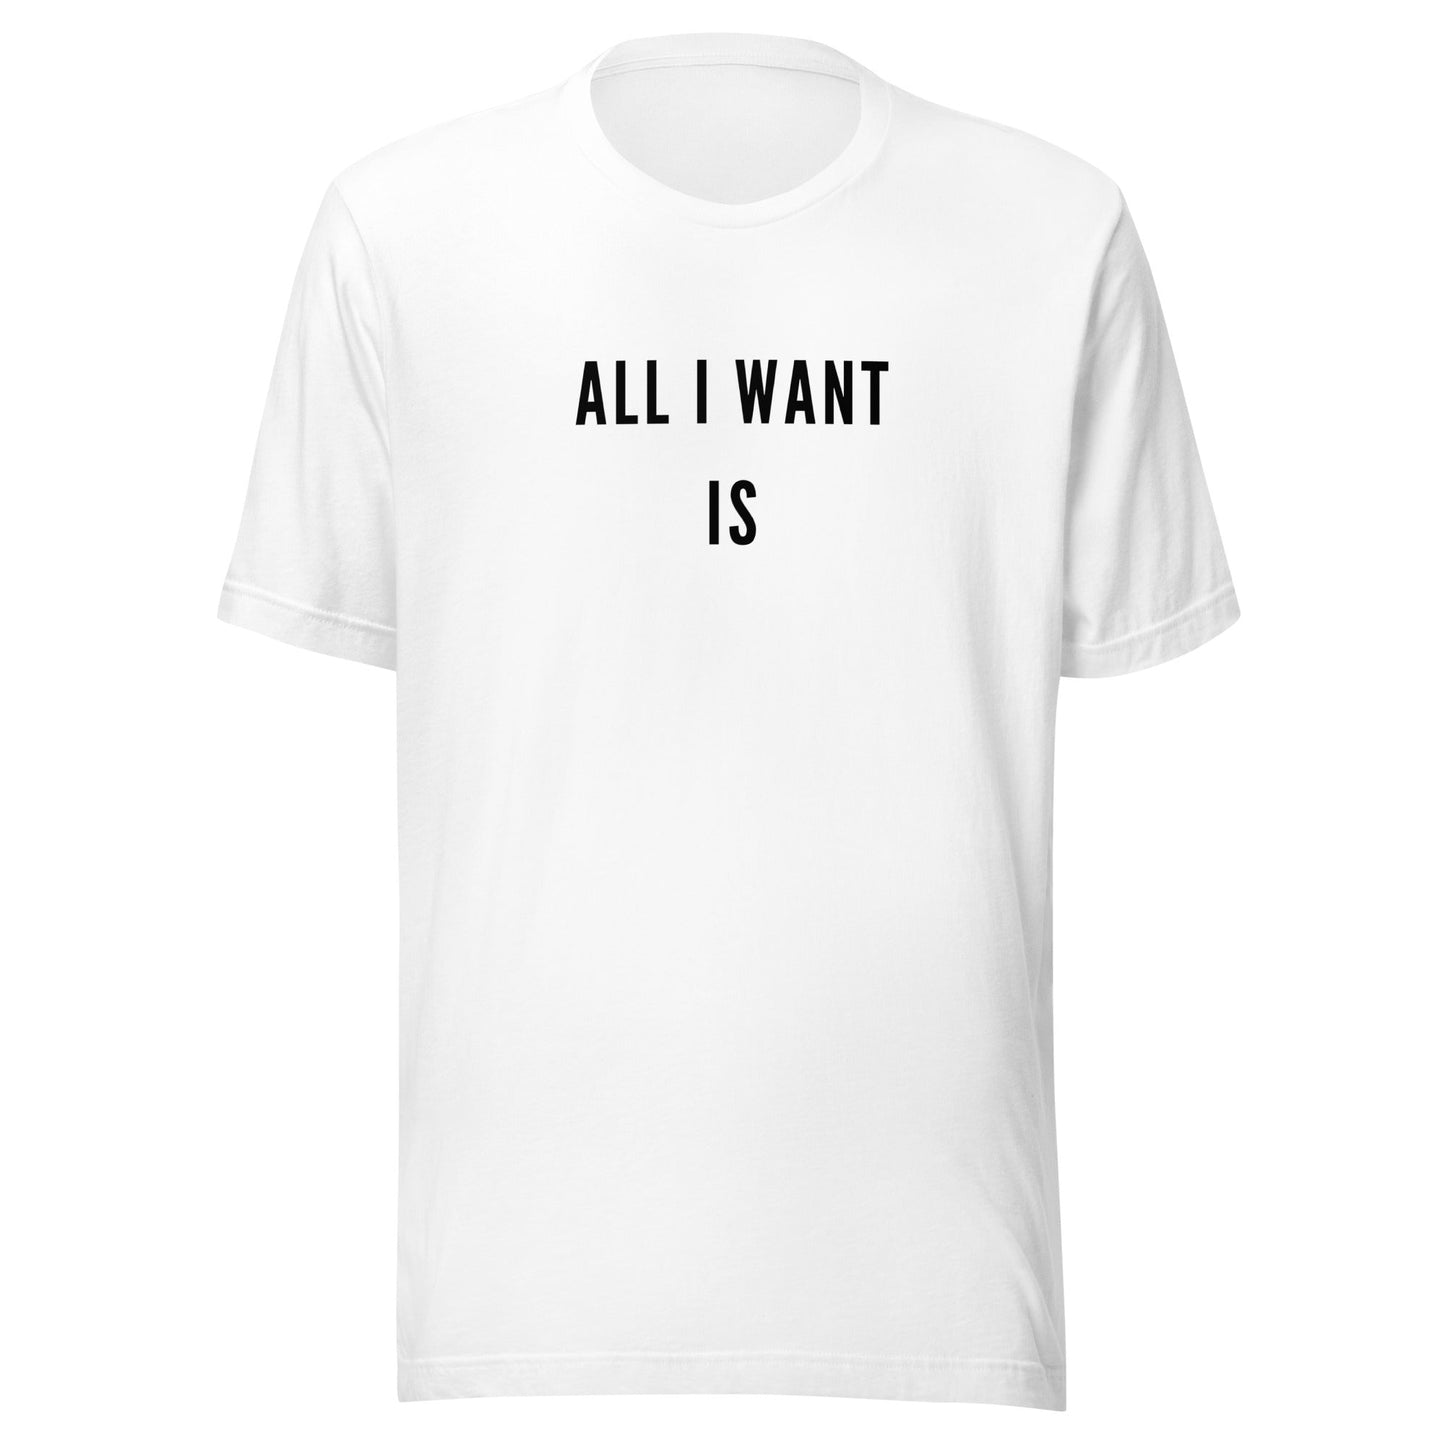 All I want is you - Unisex t-shirt - lilaloop - T-shirt